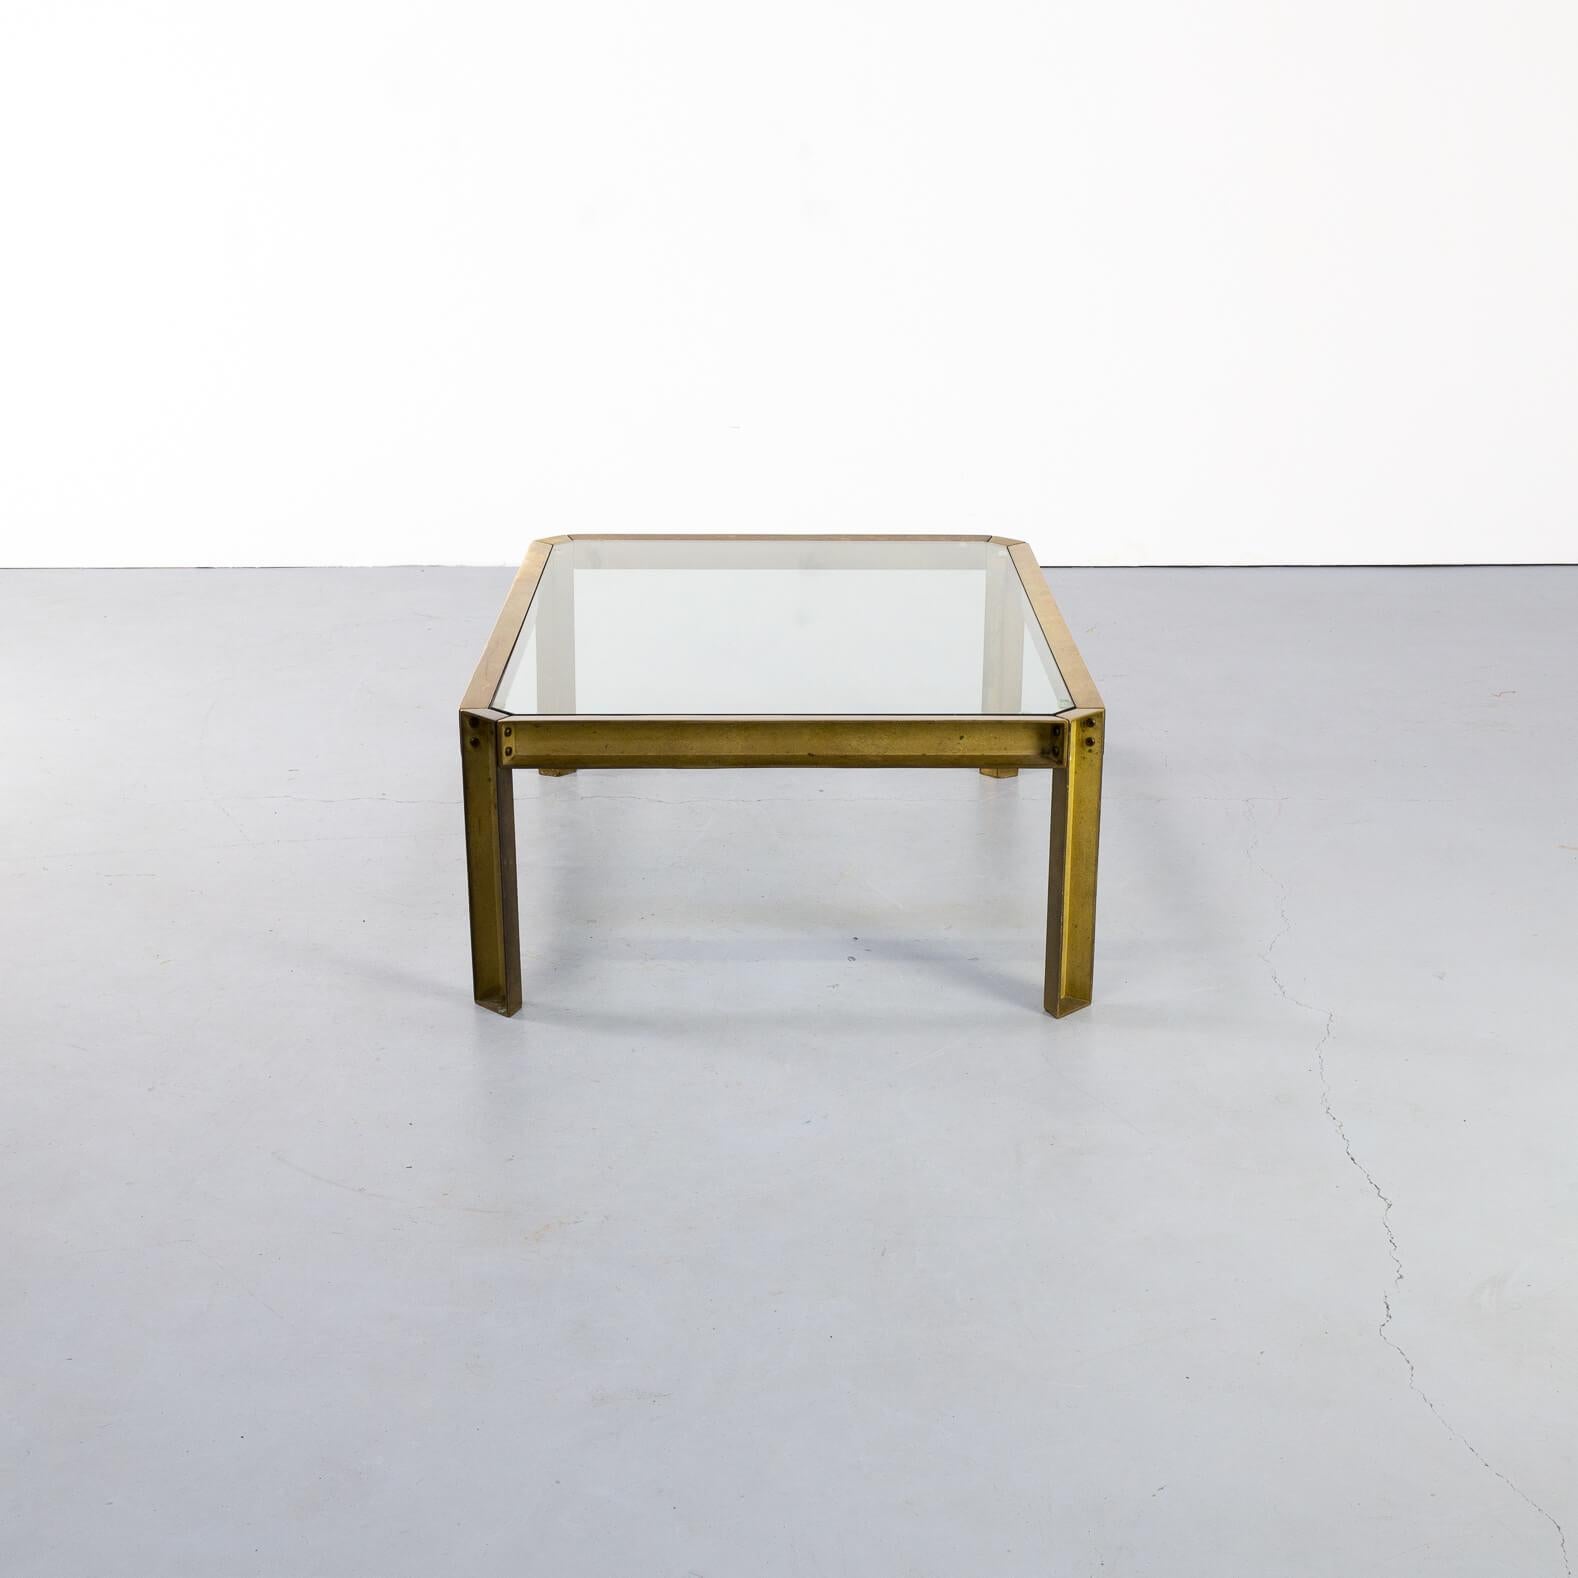 In the 1970s Peter Ghyczy designed iconic glass tables in brass frames. This model 'T09 emabssy' coffee table is a kind of opposite of the other and 'slim' Ghyczy designs. The thick solid brass frame is very visible and is being softened in its